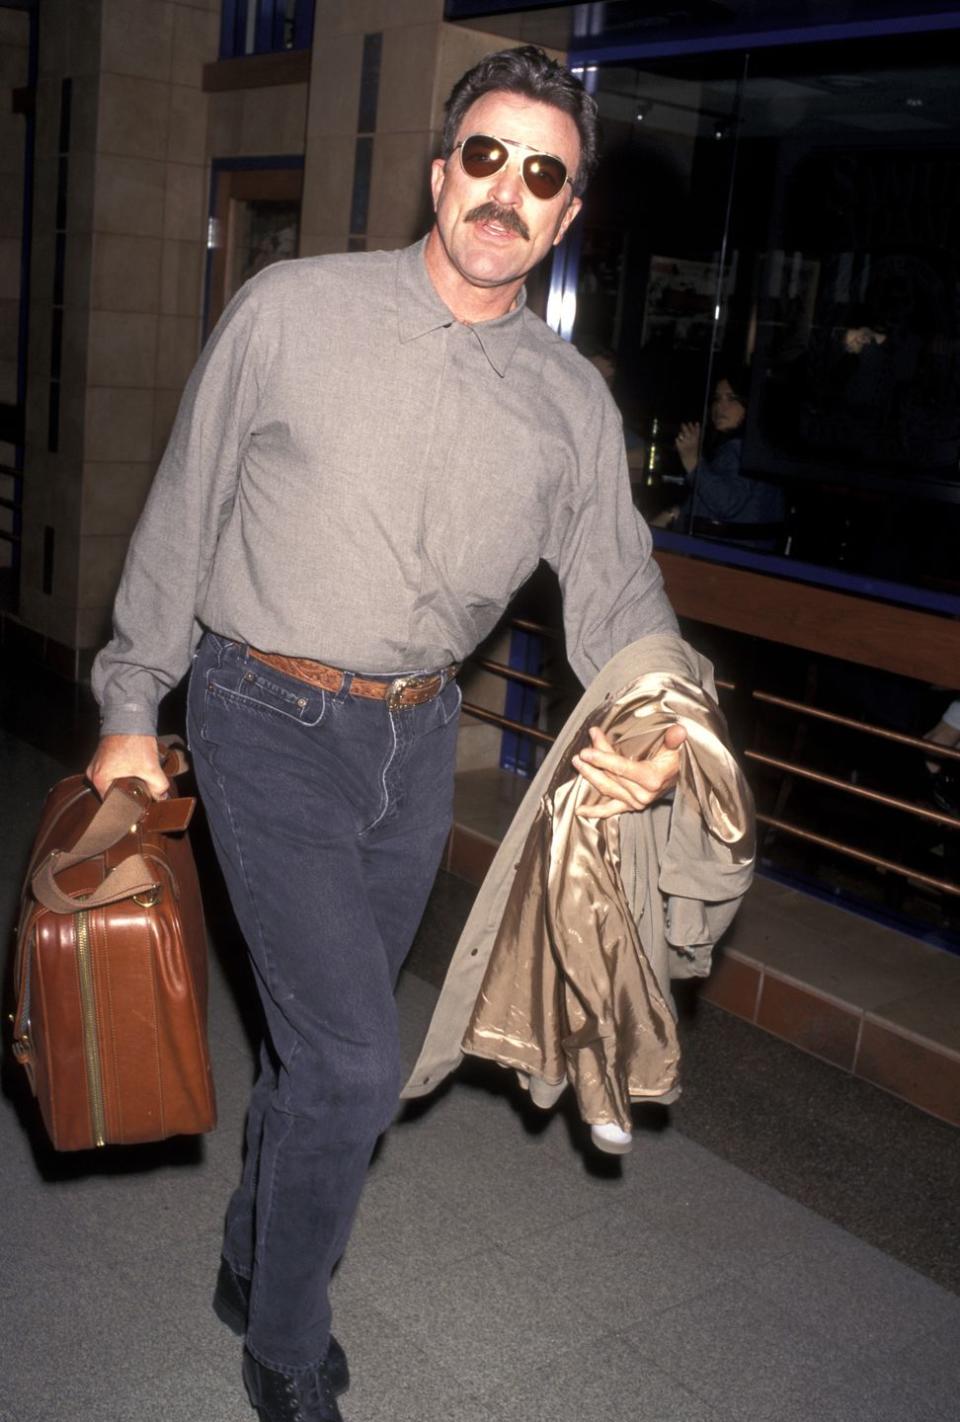 tom selleck during tom selleck at los angeles international airport at los angeles international airport in los angeles, california, united states photo by ron galellaron galella collection via getty images